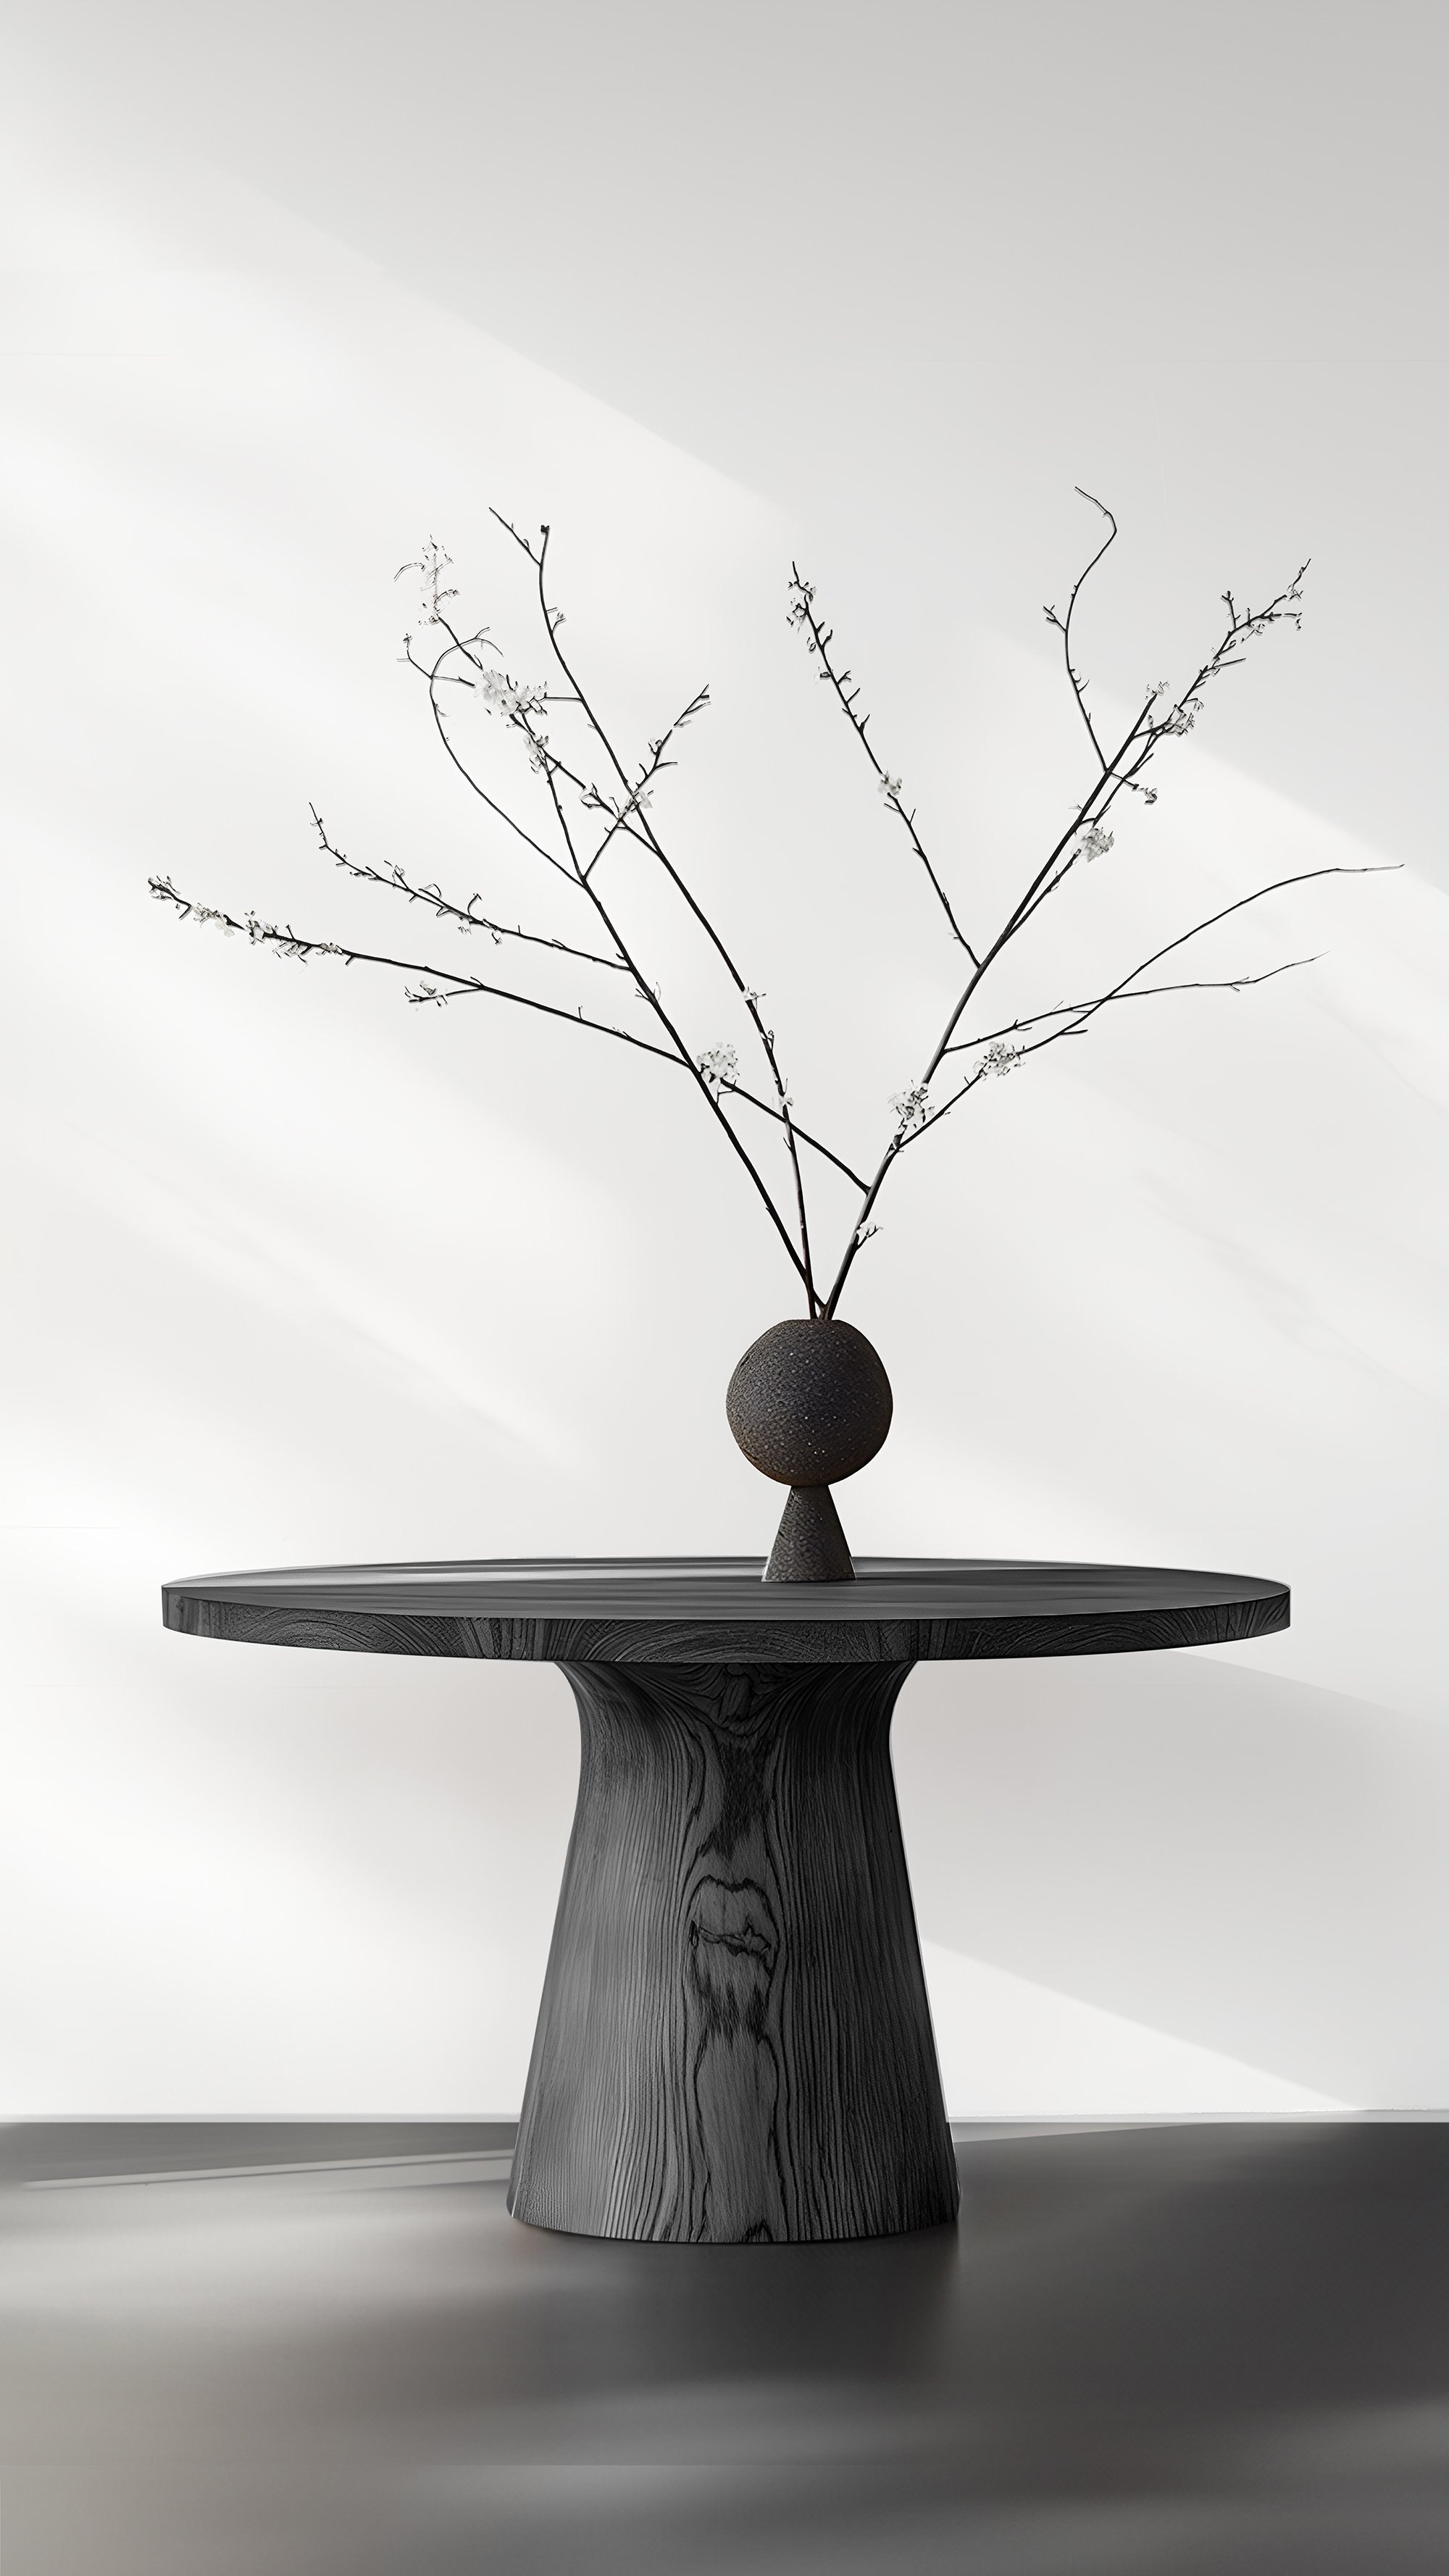 NONO's Socle Series No03, Cocktail Tables with a Black Wooden Twist - 8.jpg